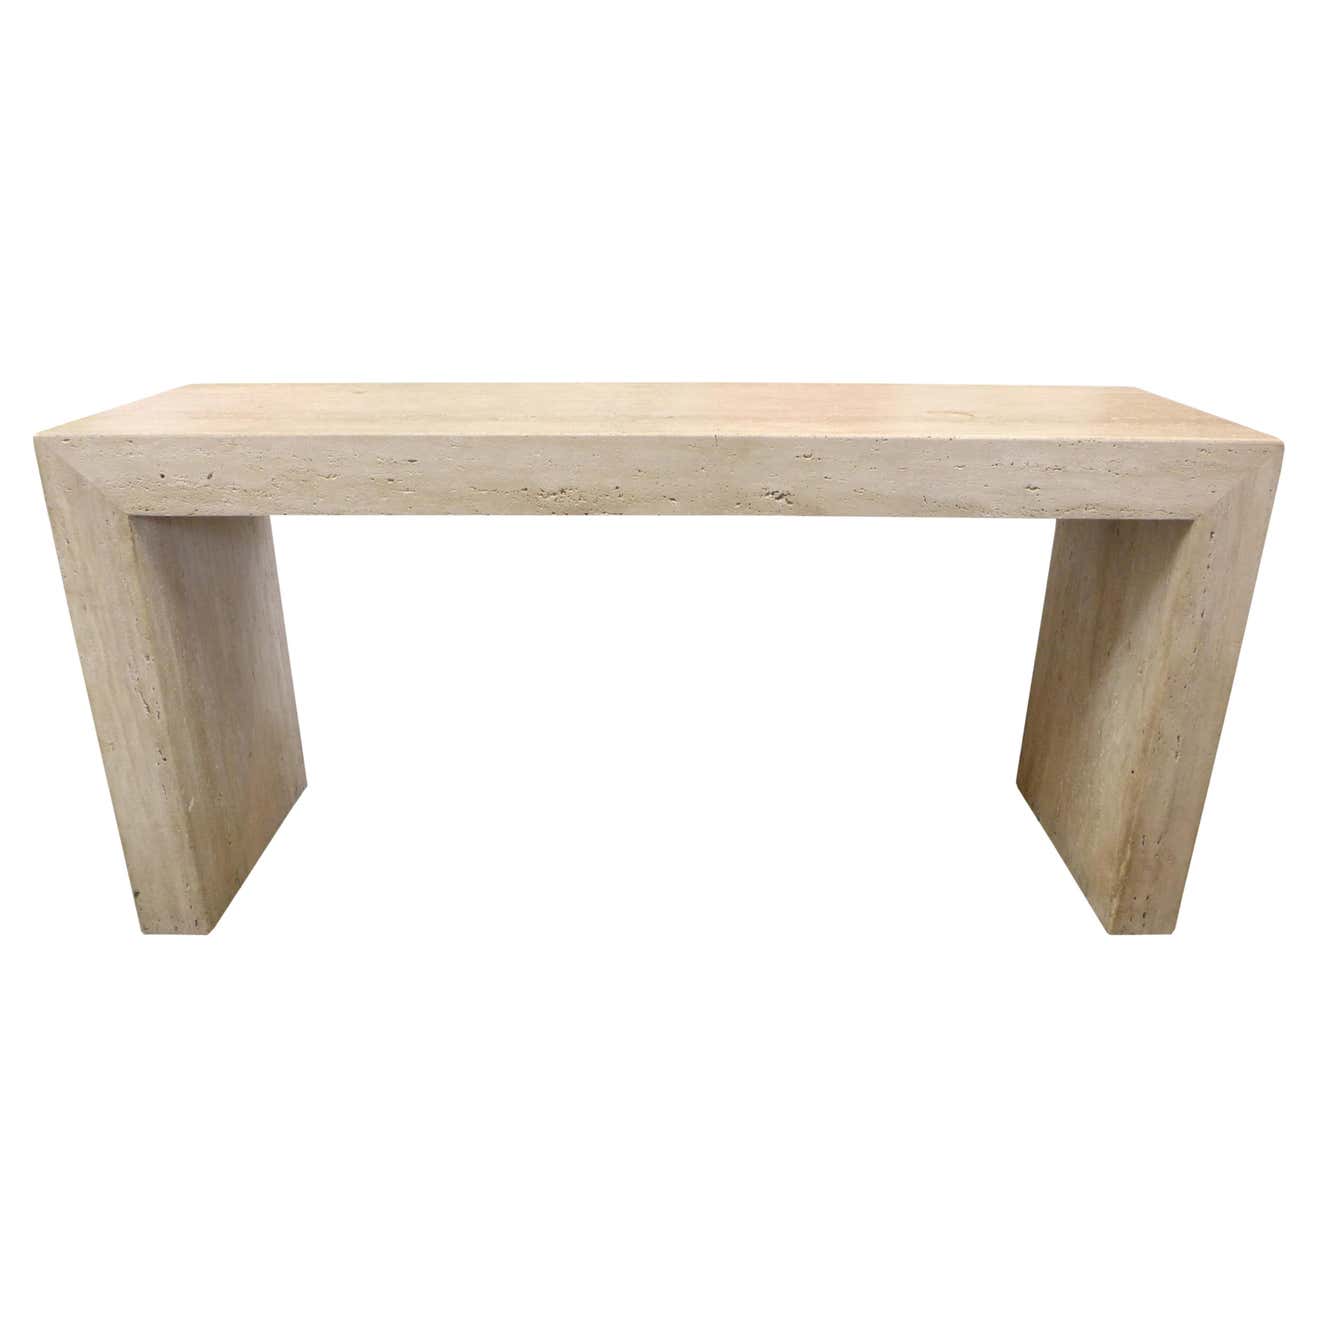 Rectilinear Modernist Travertine Console Table at 1stDibs